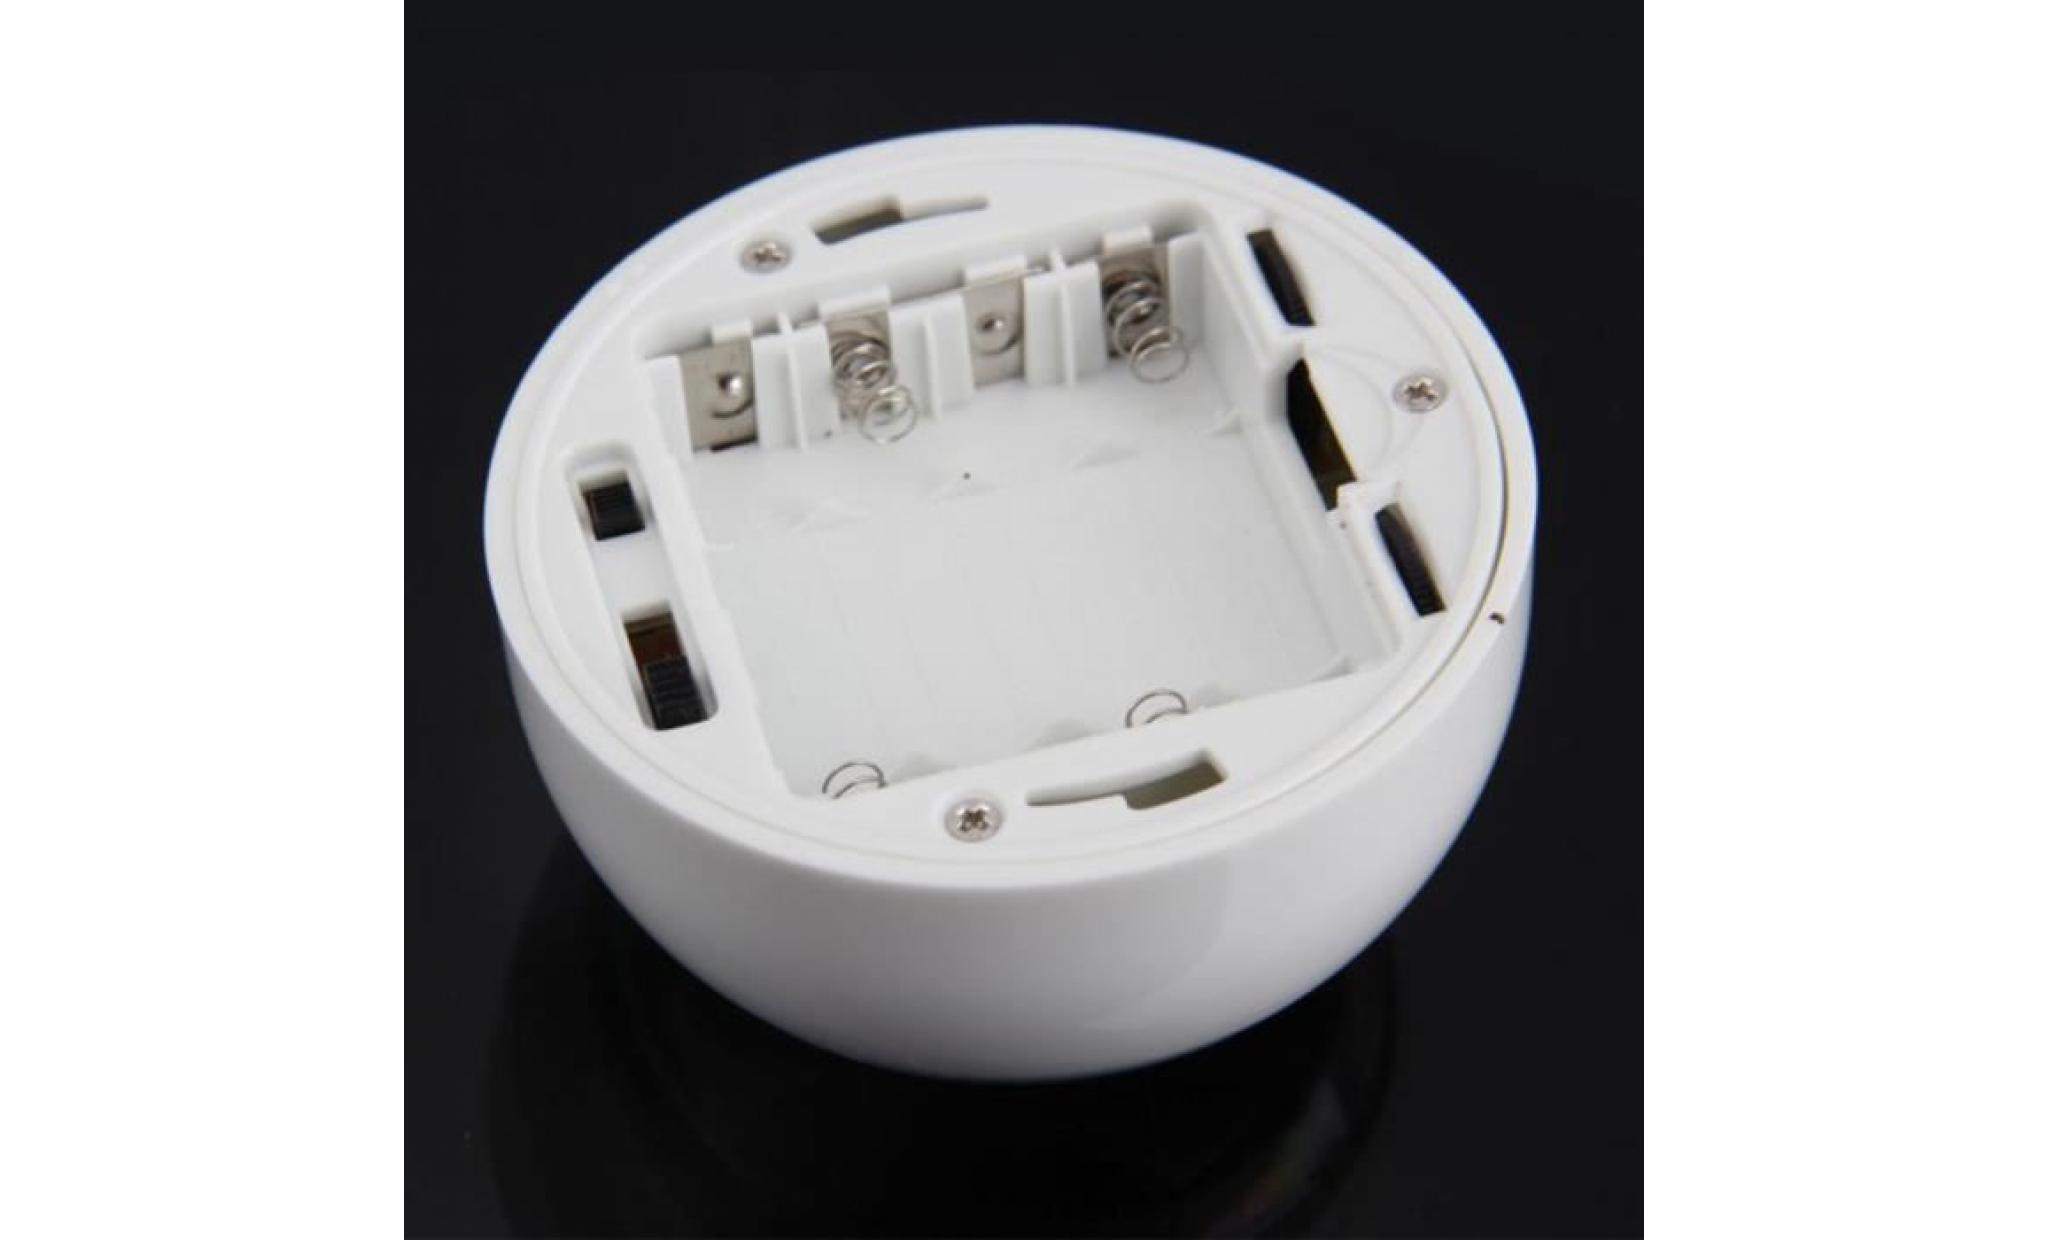 pir auto sensor motion detector lamp 6 leds light wireless infrared home outdoor pageare1052 pageare1052